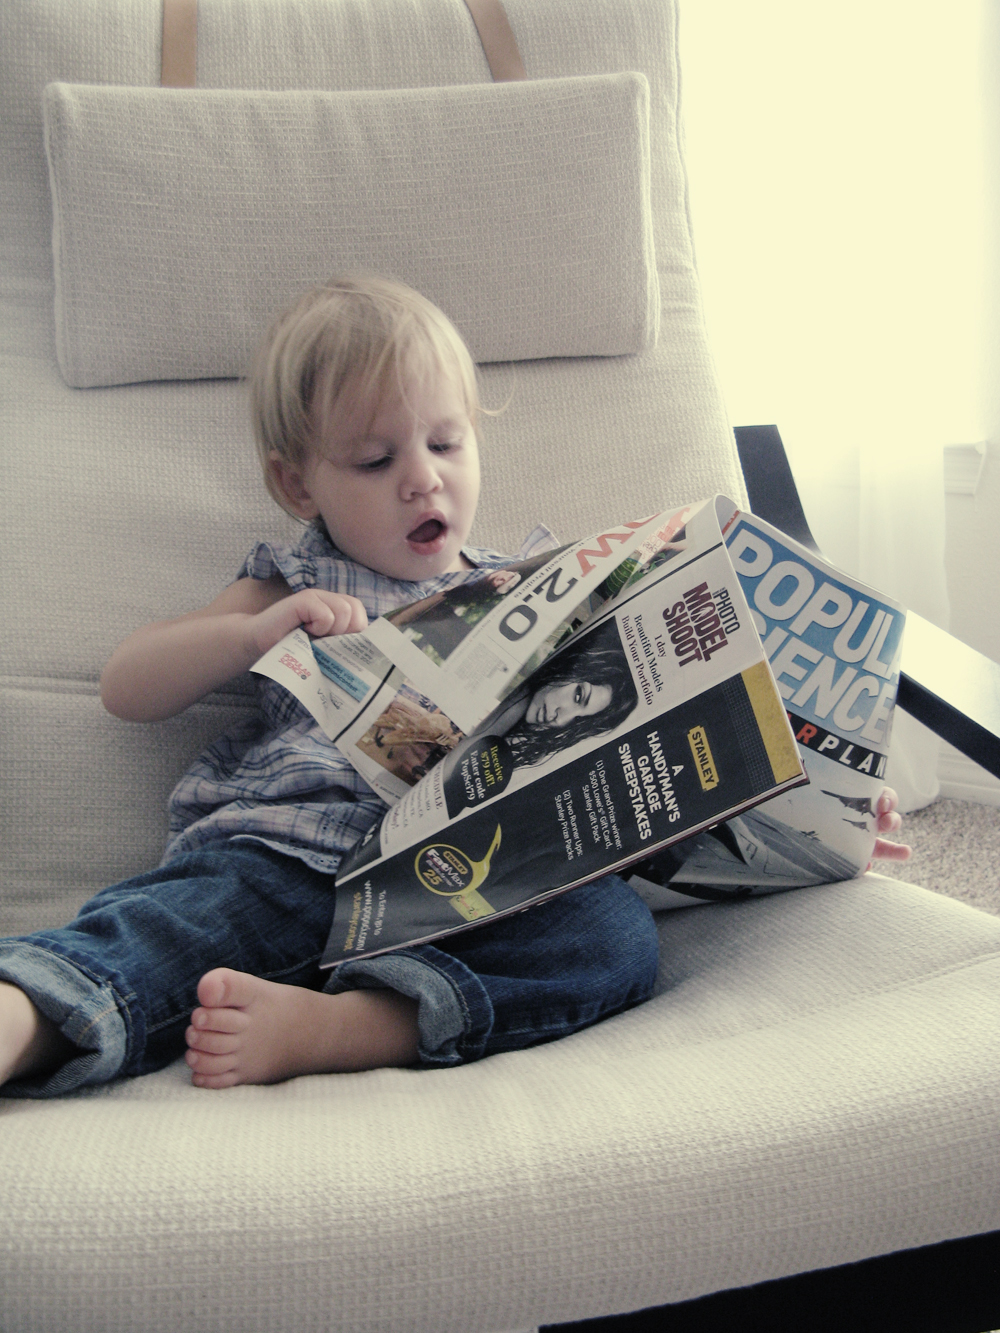 Popular Science's youngest reader - photo via Oaxacaborn dot com